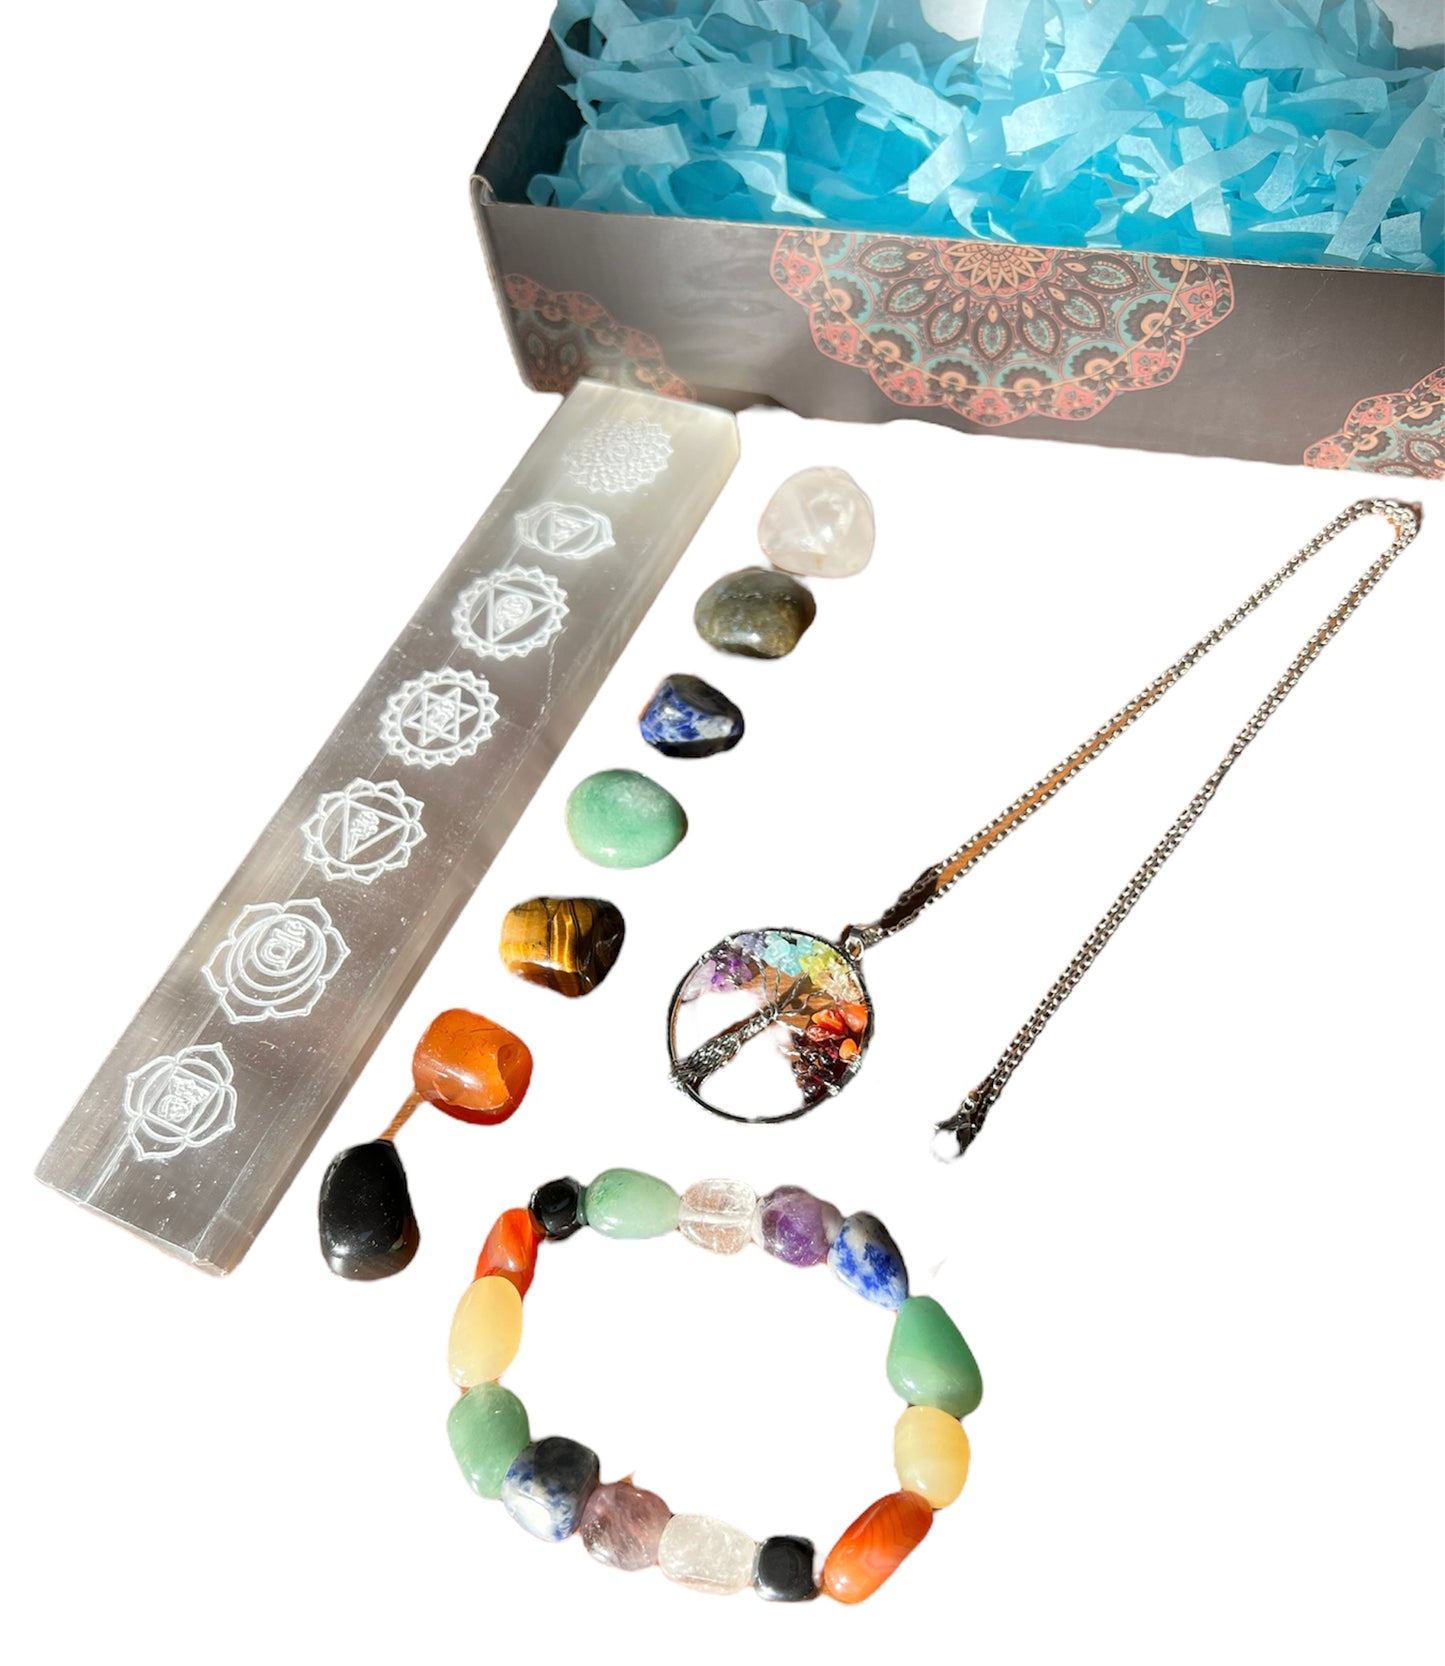 Ultimate Chakra Cleansing Wellness Gift Set